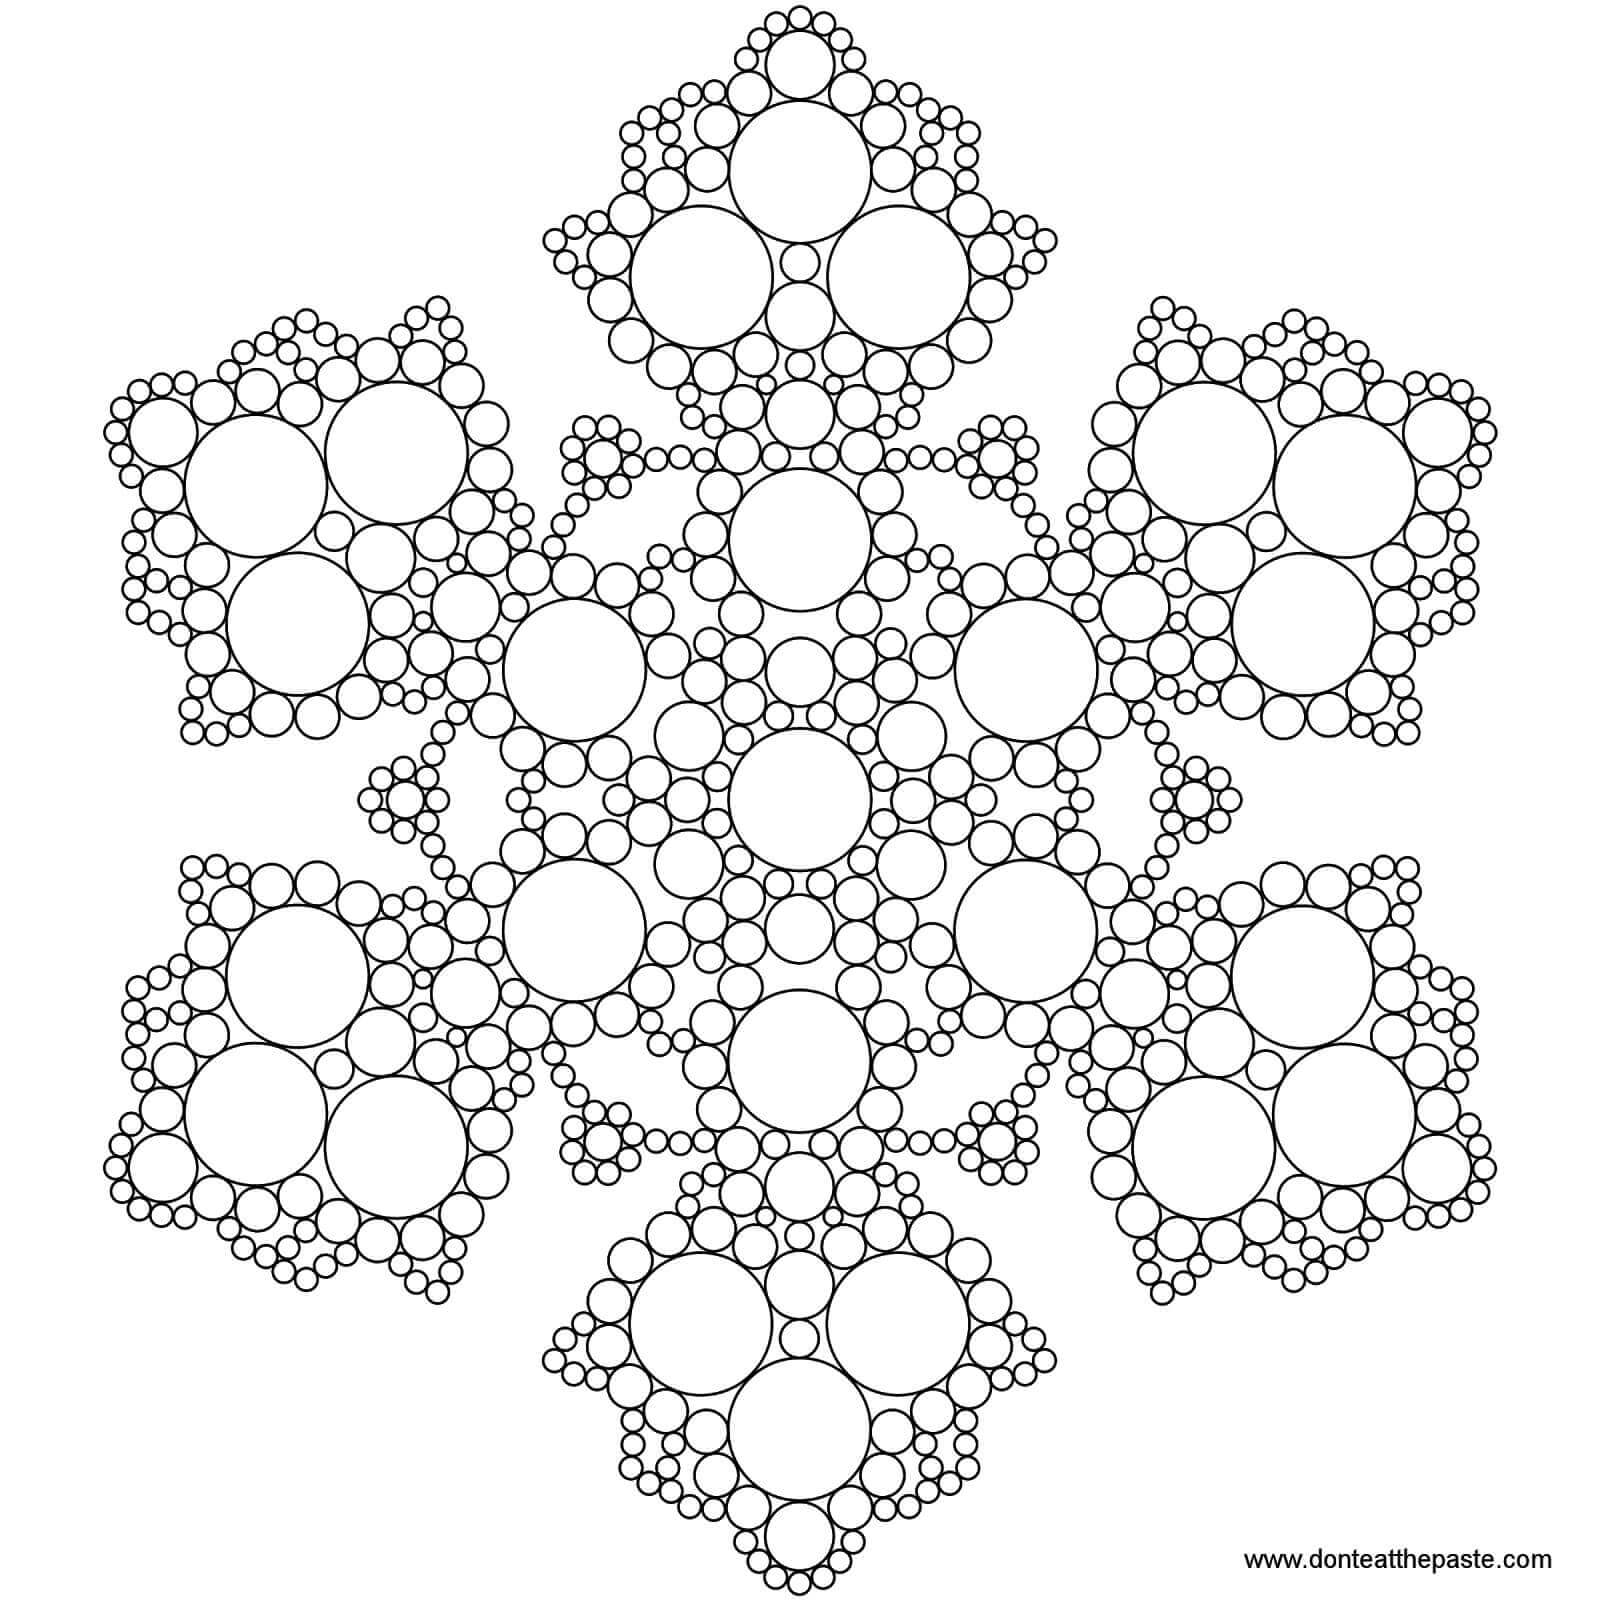 Snowflake in Circles | unicorn coloring pages | snowflake printable